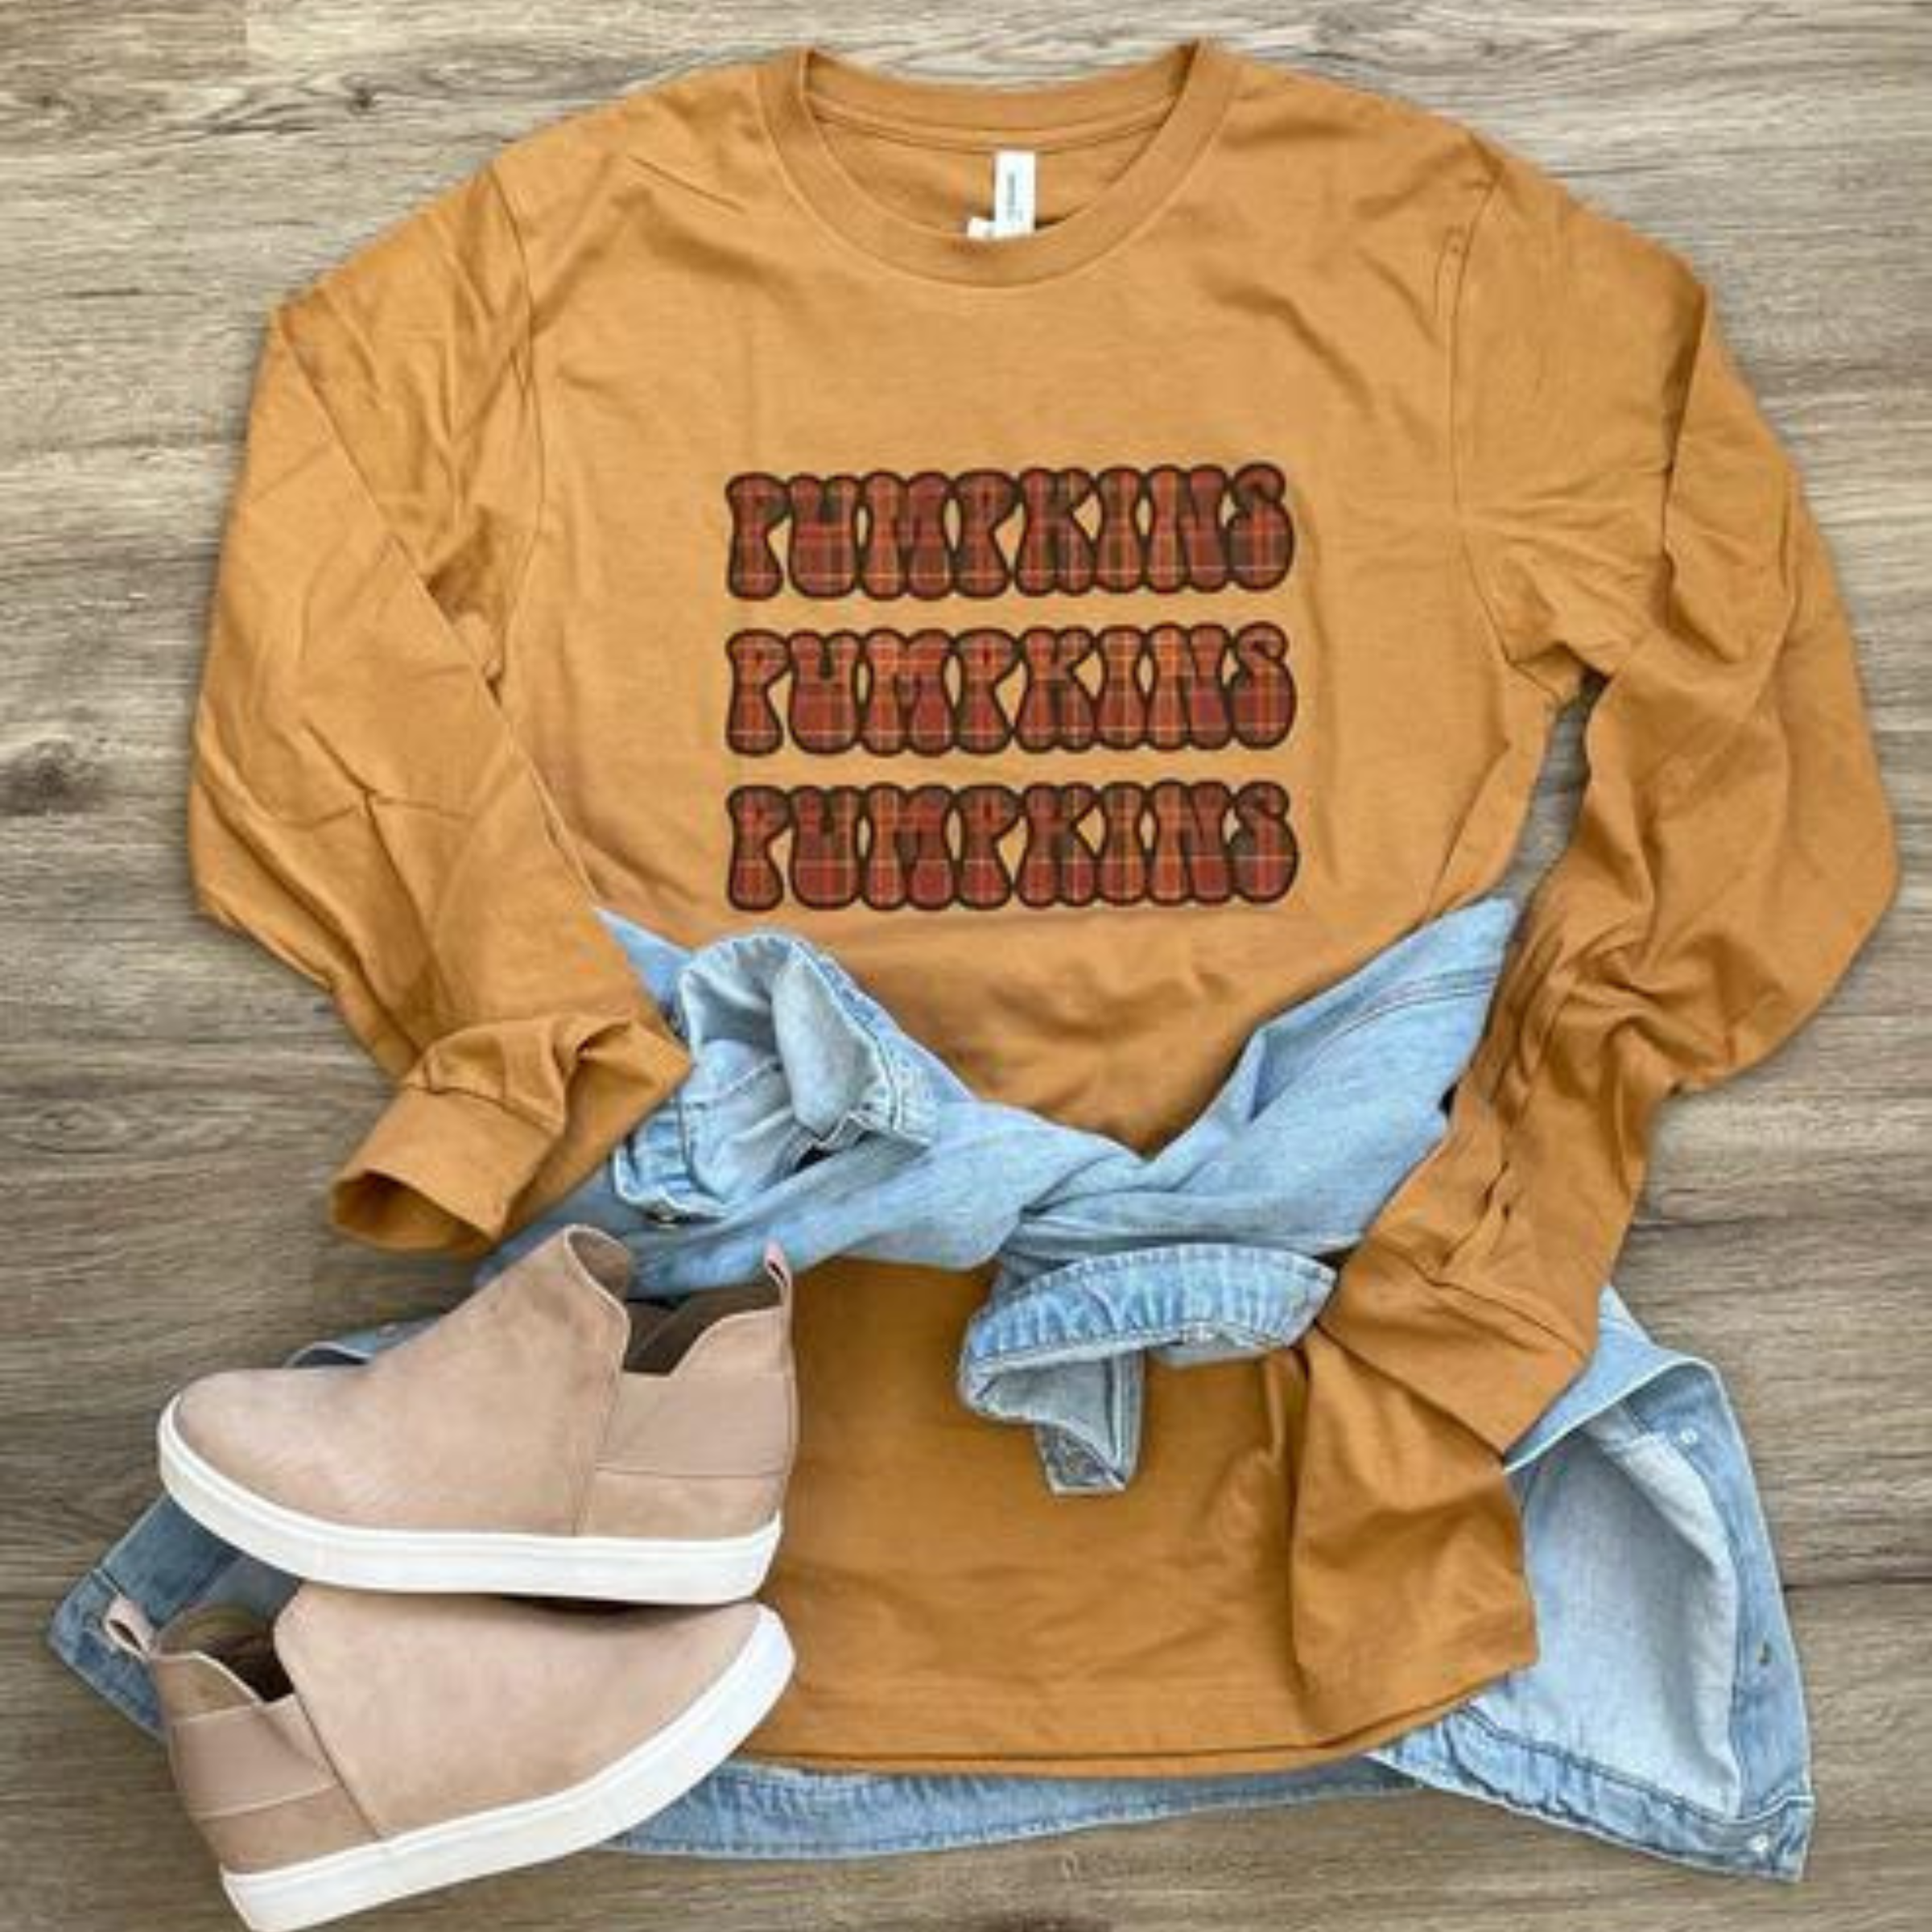 This mustard yellow graphic tee says "Pumpkins Pumpkins Pumpkins", which is in a flannel print and stacked. This is a Bella + Canvas long sleeve tee with a crew neck. It is shown as a flat lay with a light denim jacket tied around the waist and tan sneakers. 